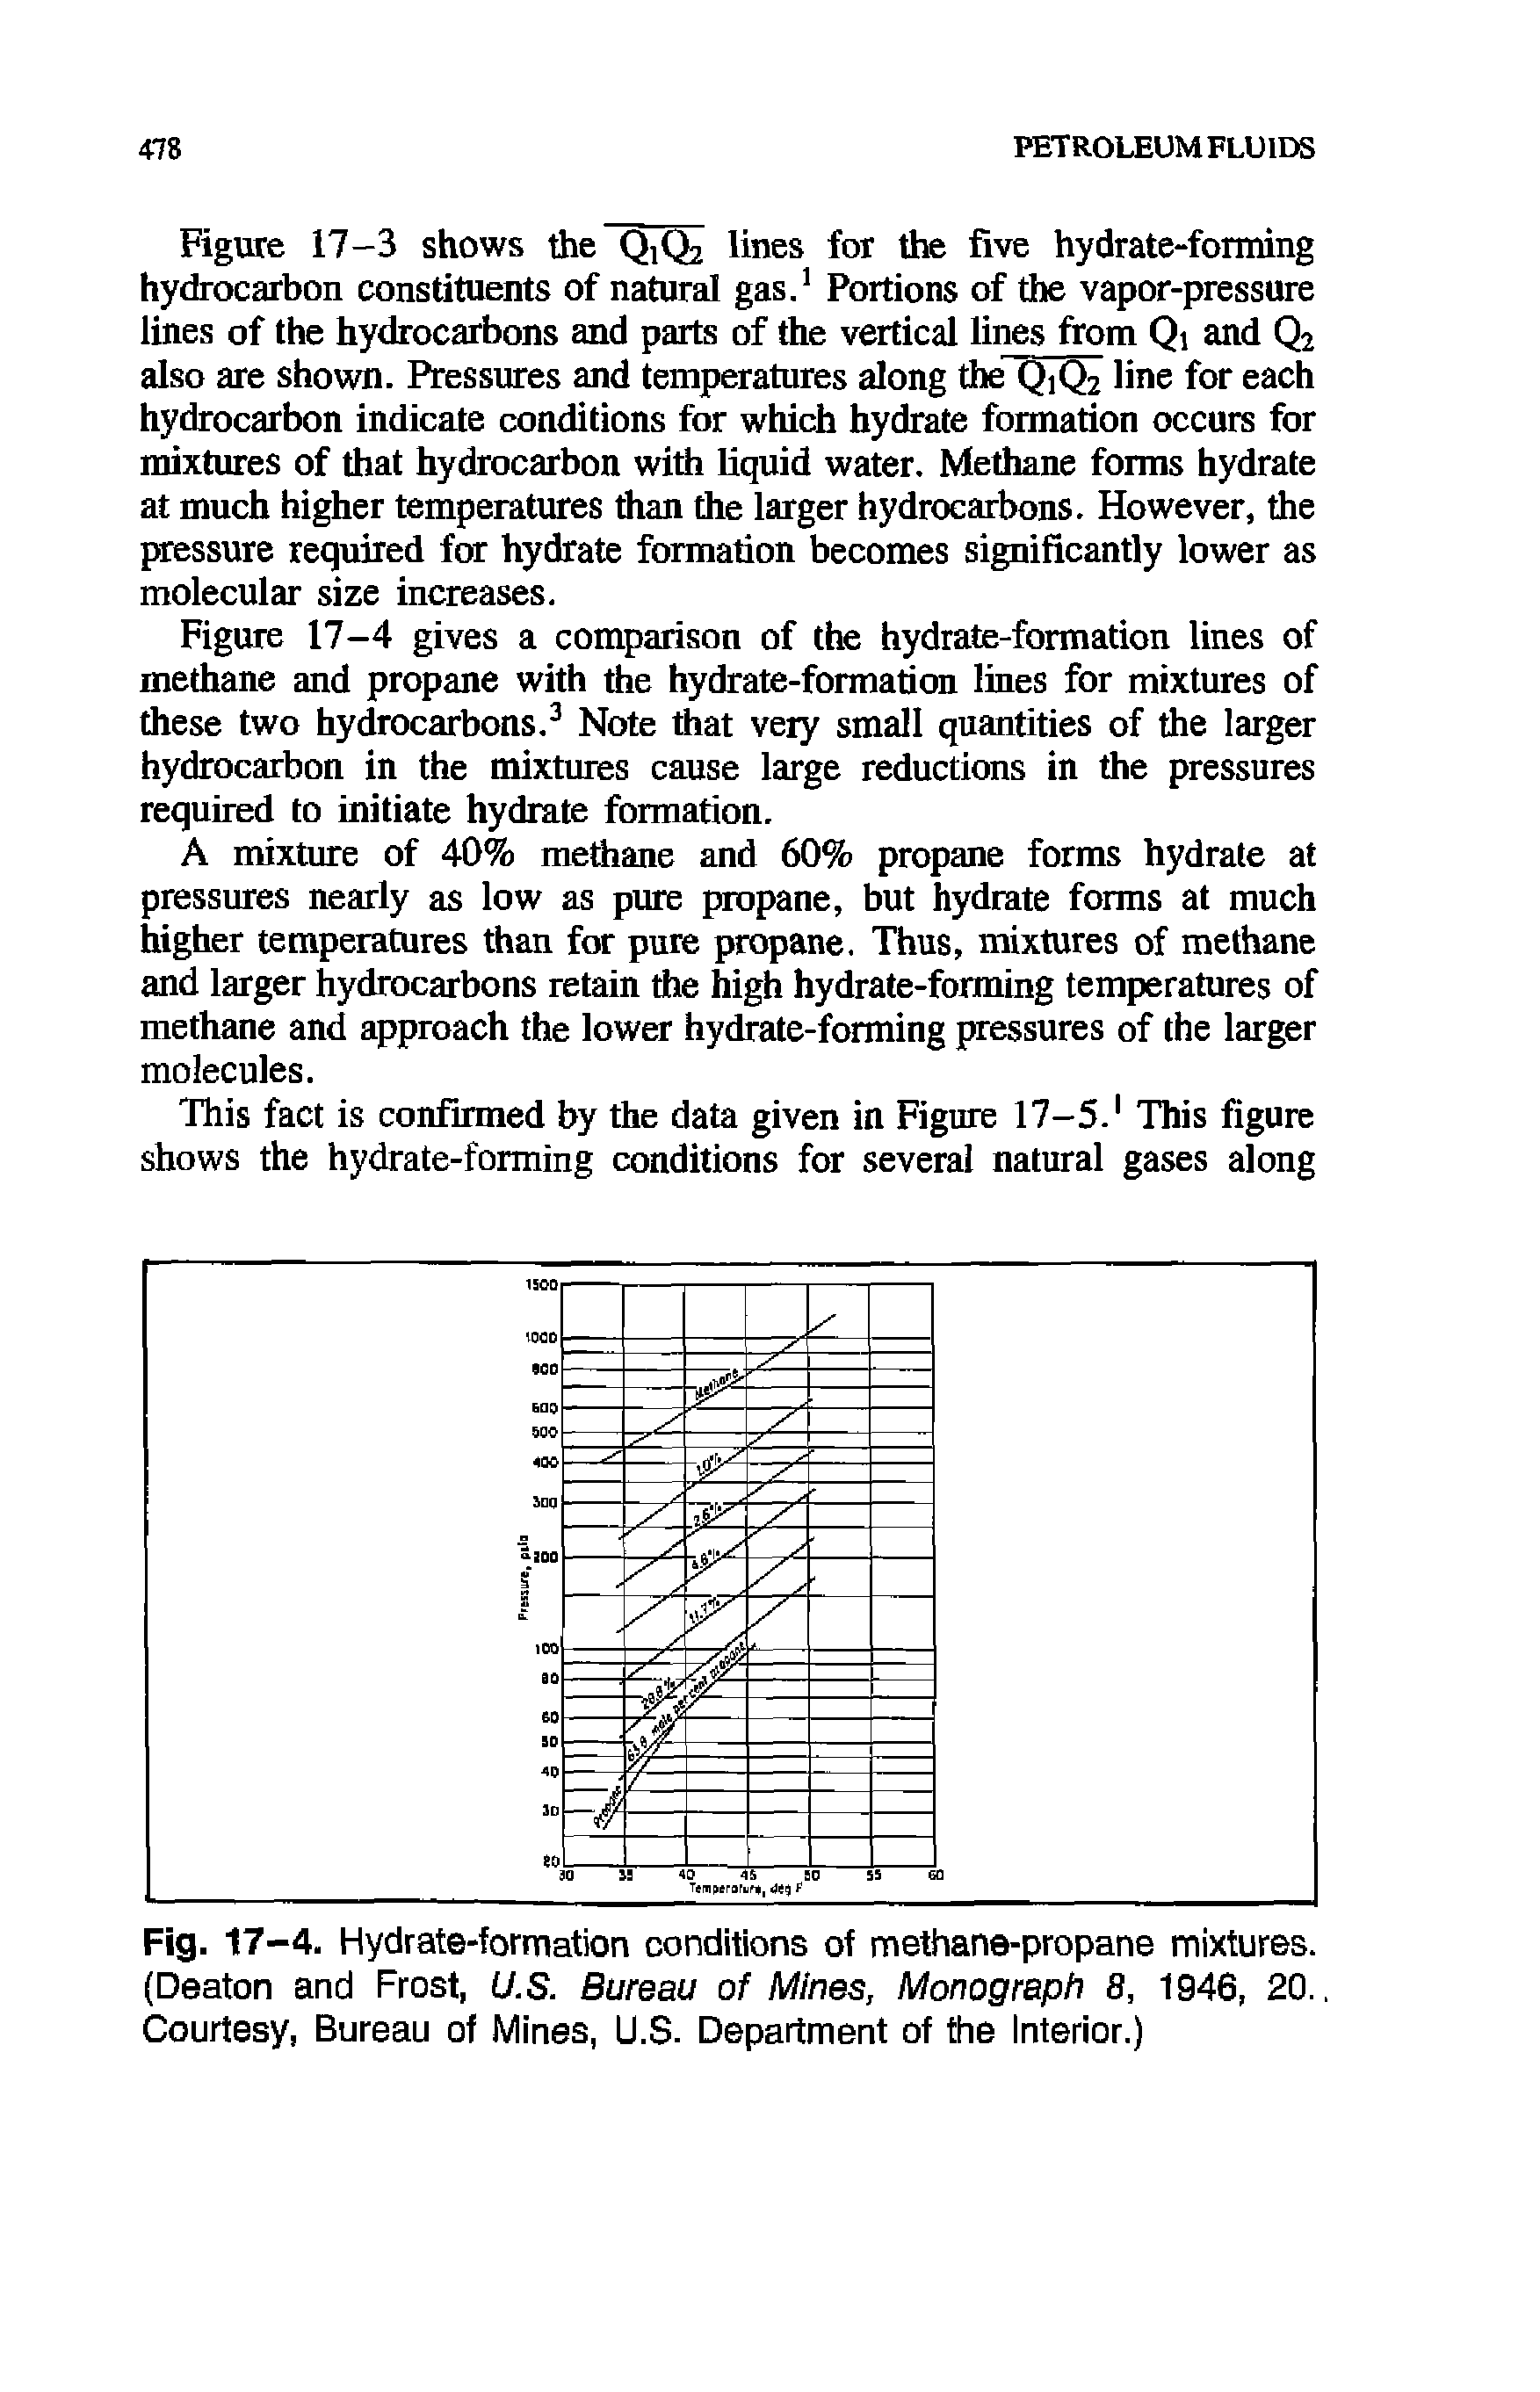 Fig. 17-4. Hydrate-formation conditions of methane-propane mixtures. (Deaton and Frost, U.S. Bureau of Mines, Monograph 8, 1946, 20.. Courtesy, Bureau of Mines, U.S. Department of the Interior.)...